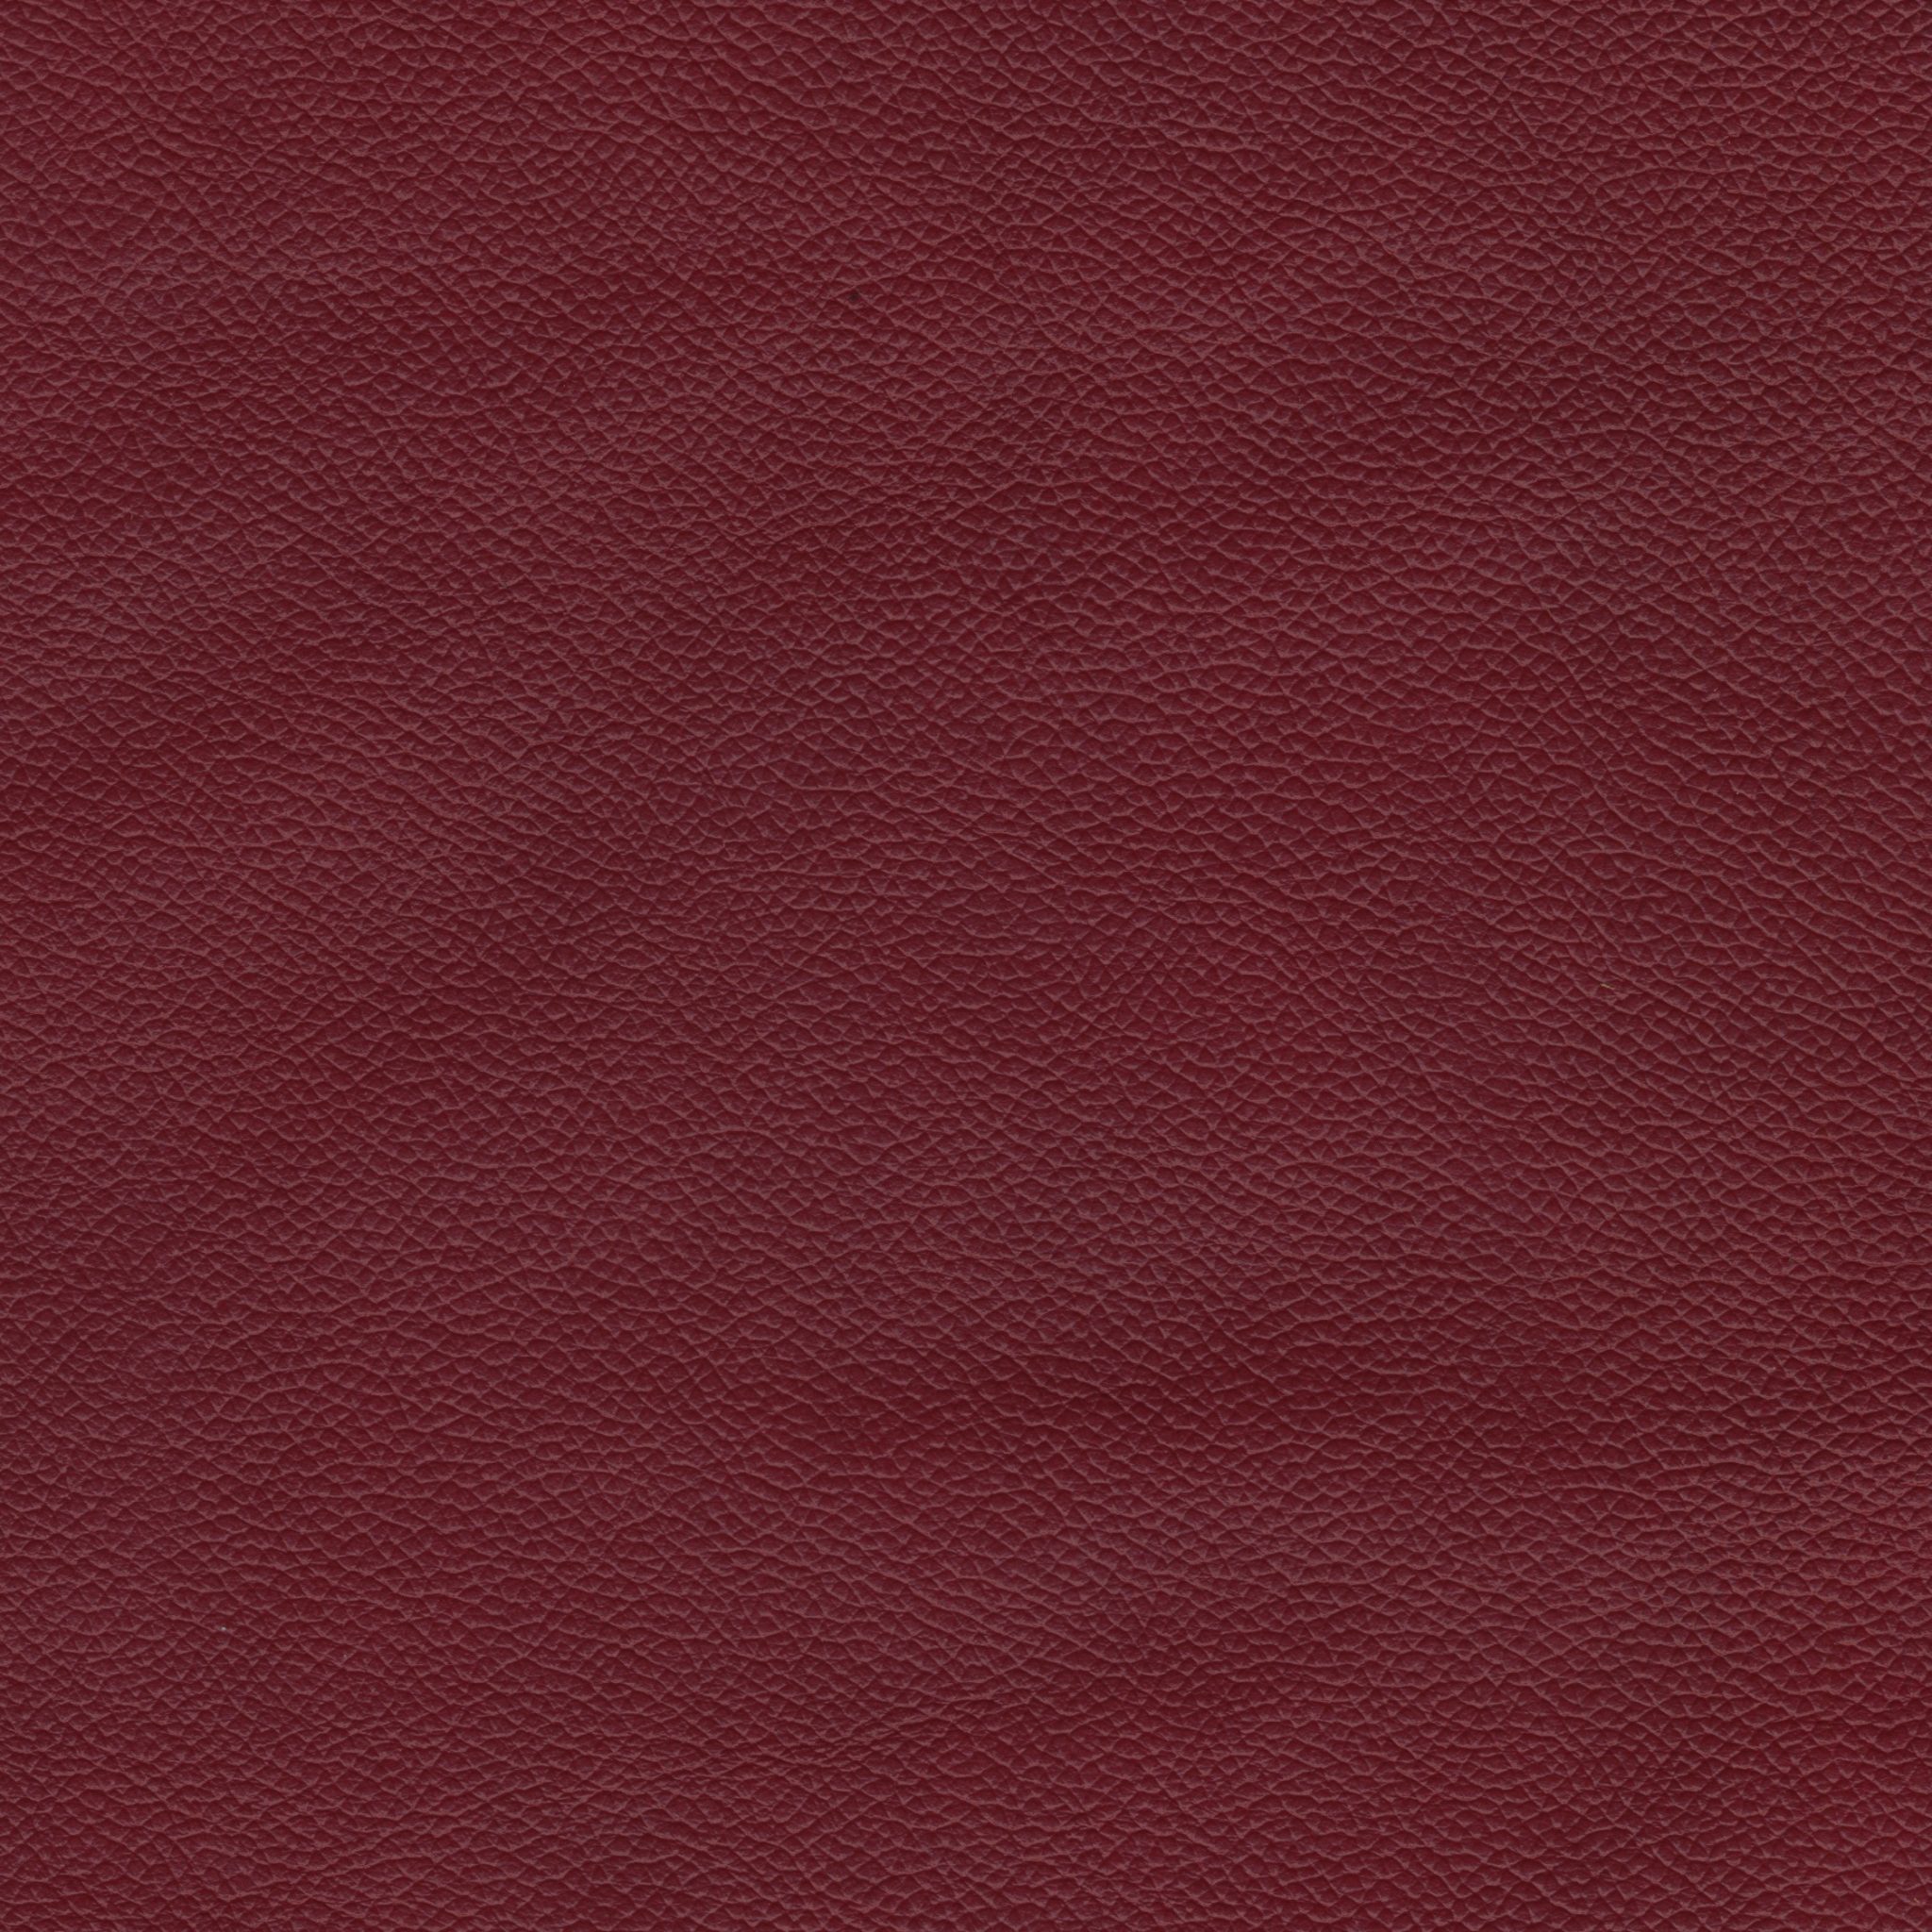 Supple Red - Leather Swatch